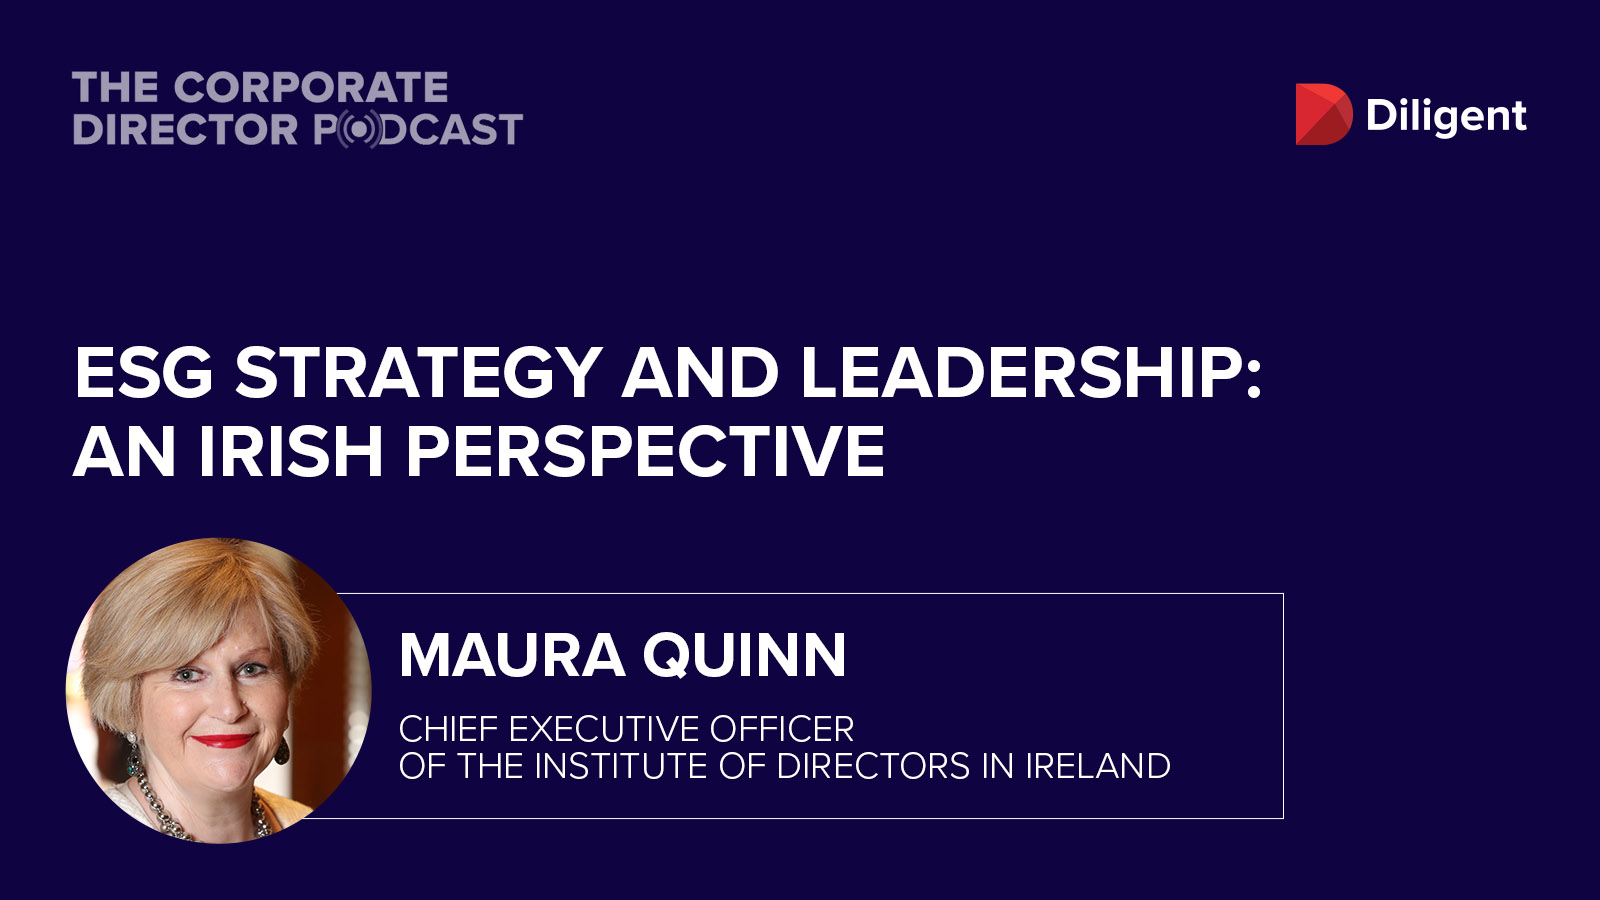 Diligent Corporate Director Podcast ESG Strategy and Leadership An Irish Perspective